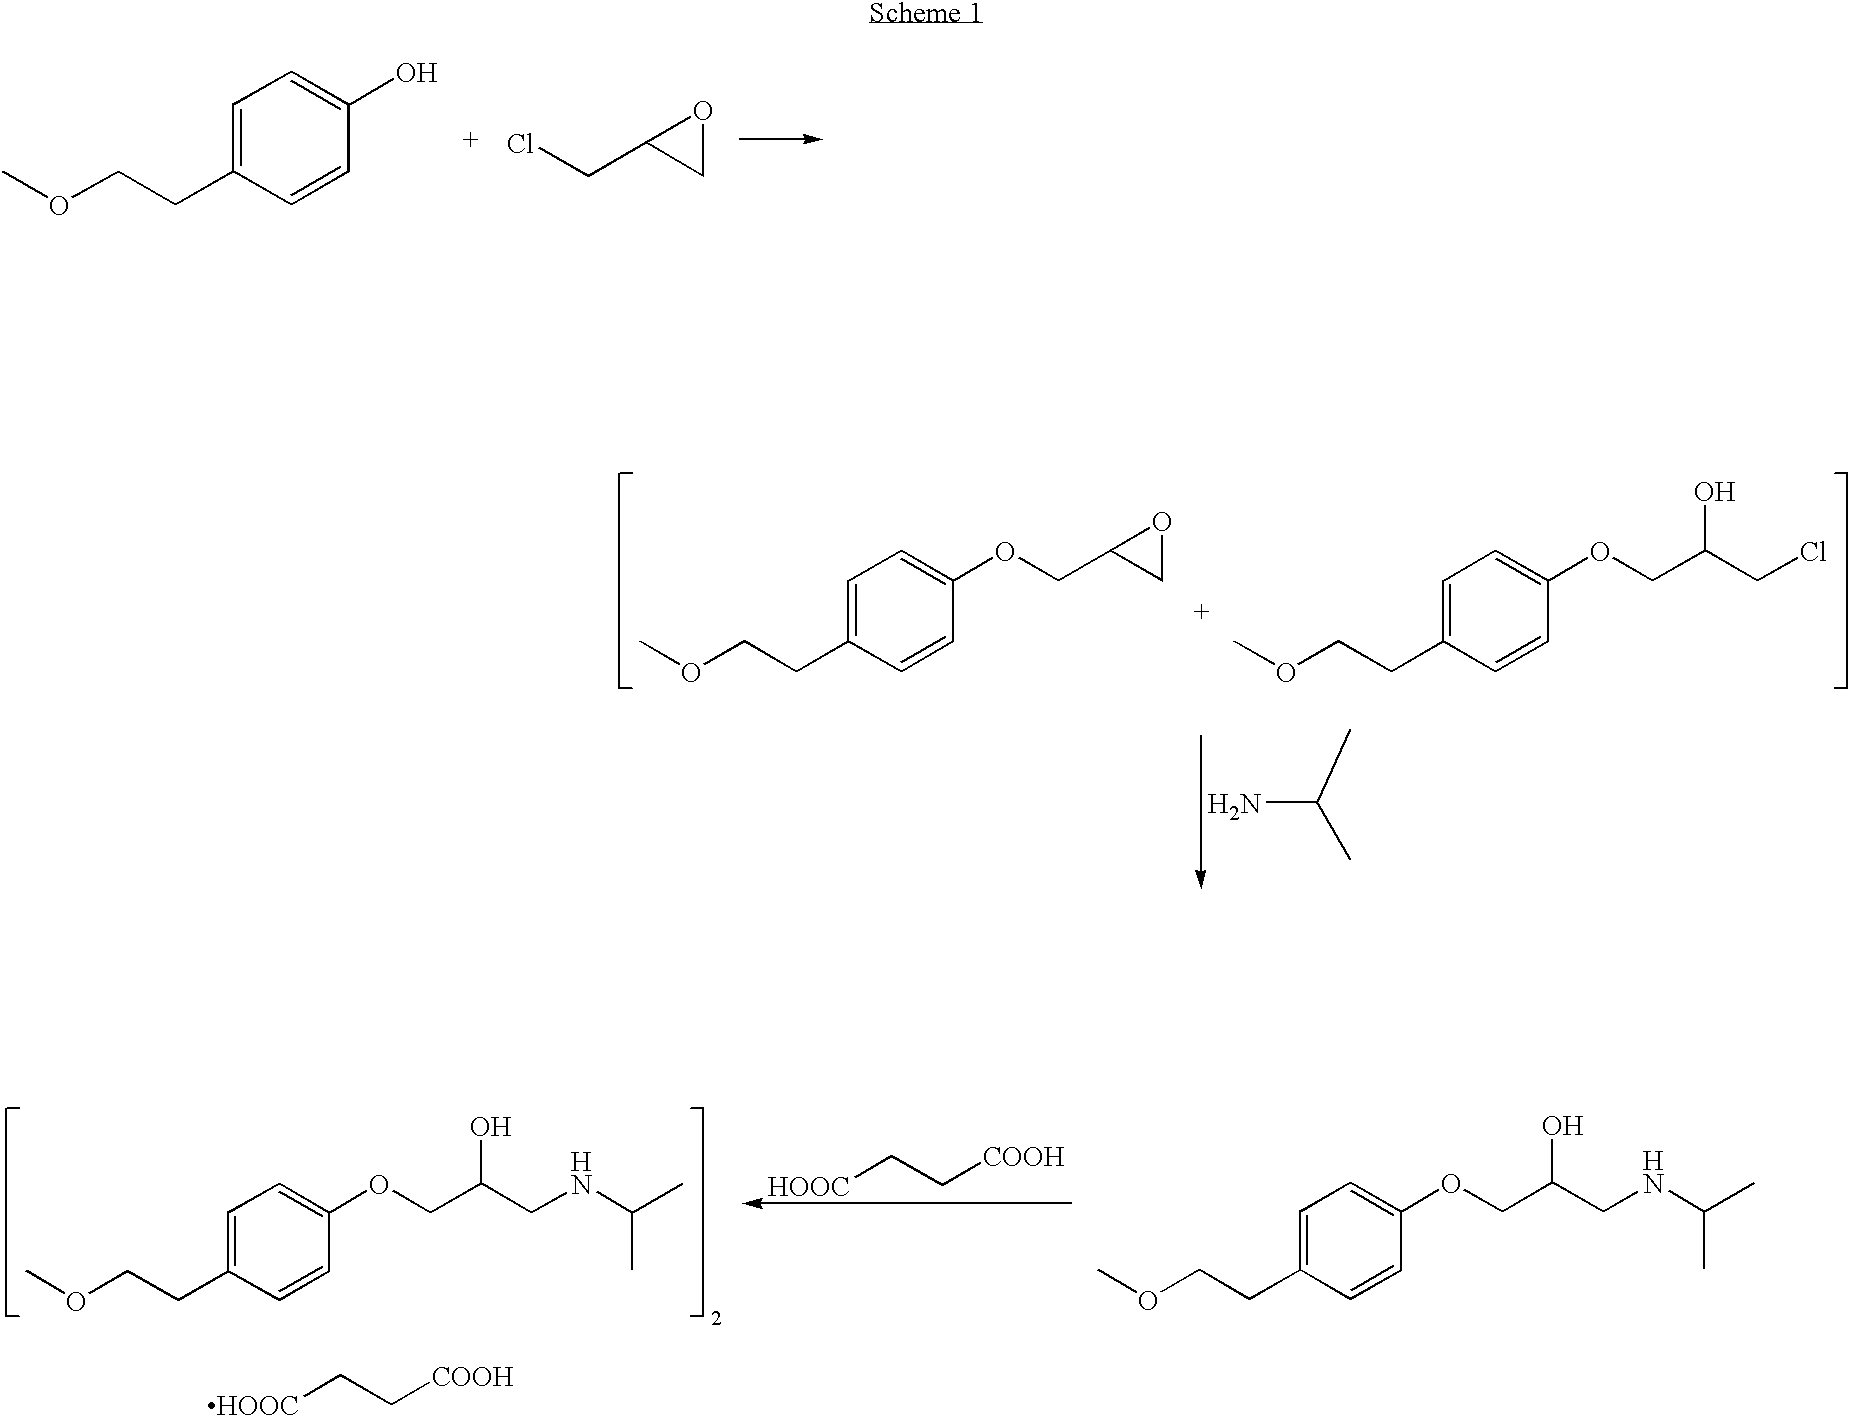 Synthesis and preparations of metoprolol and its salts